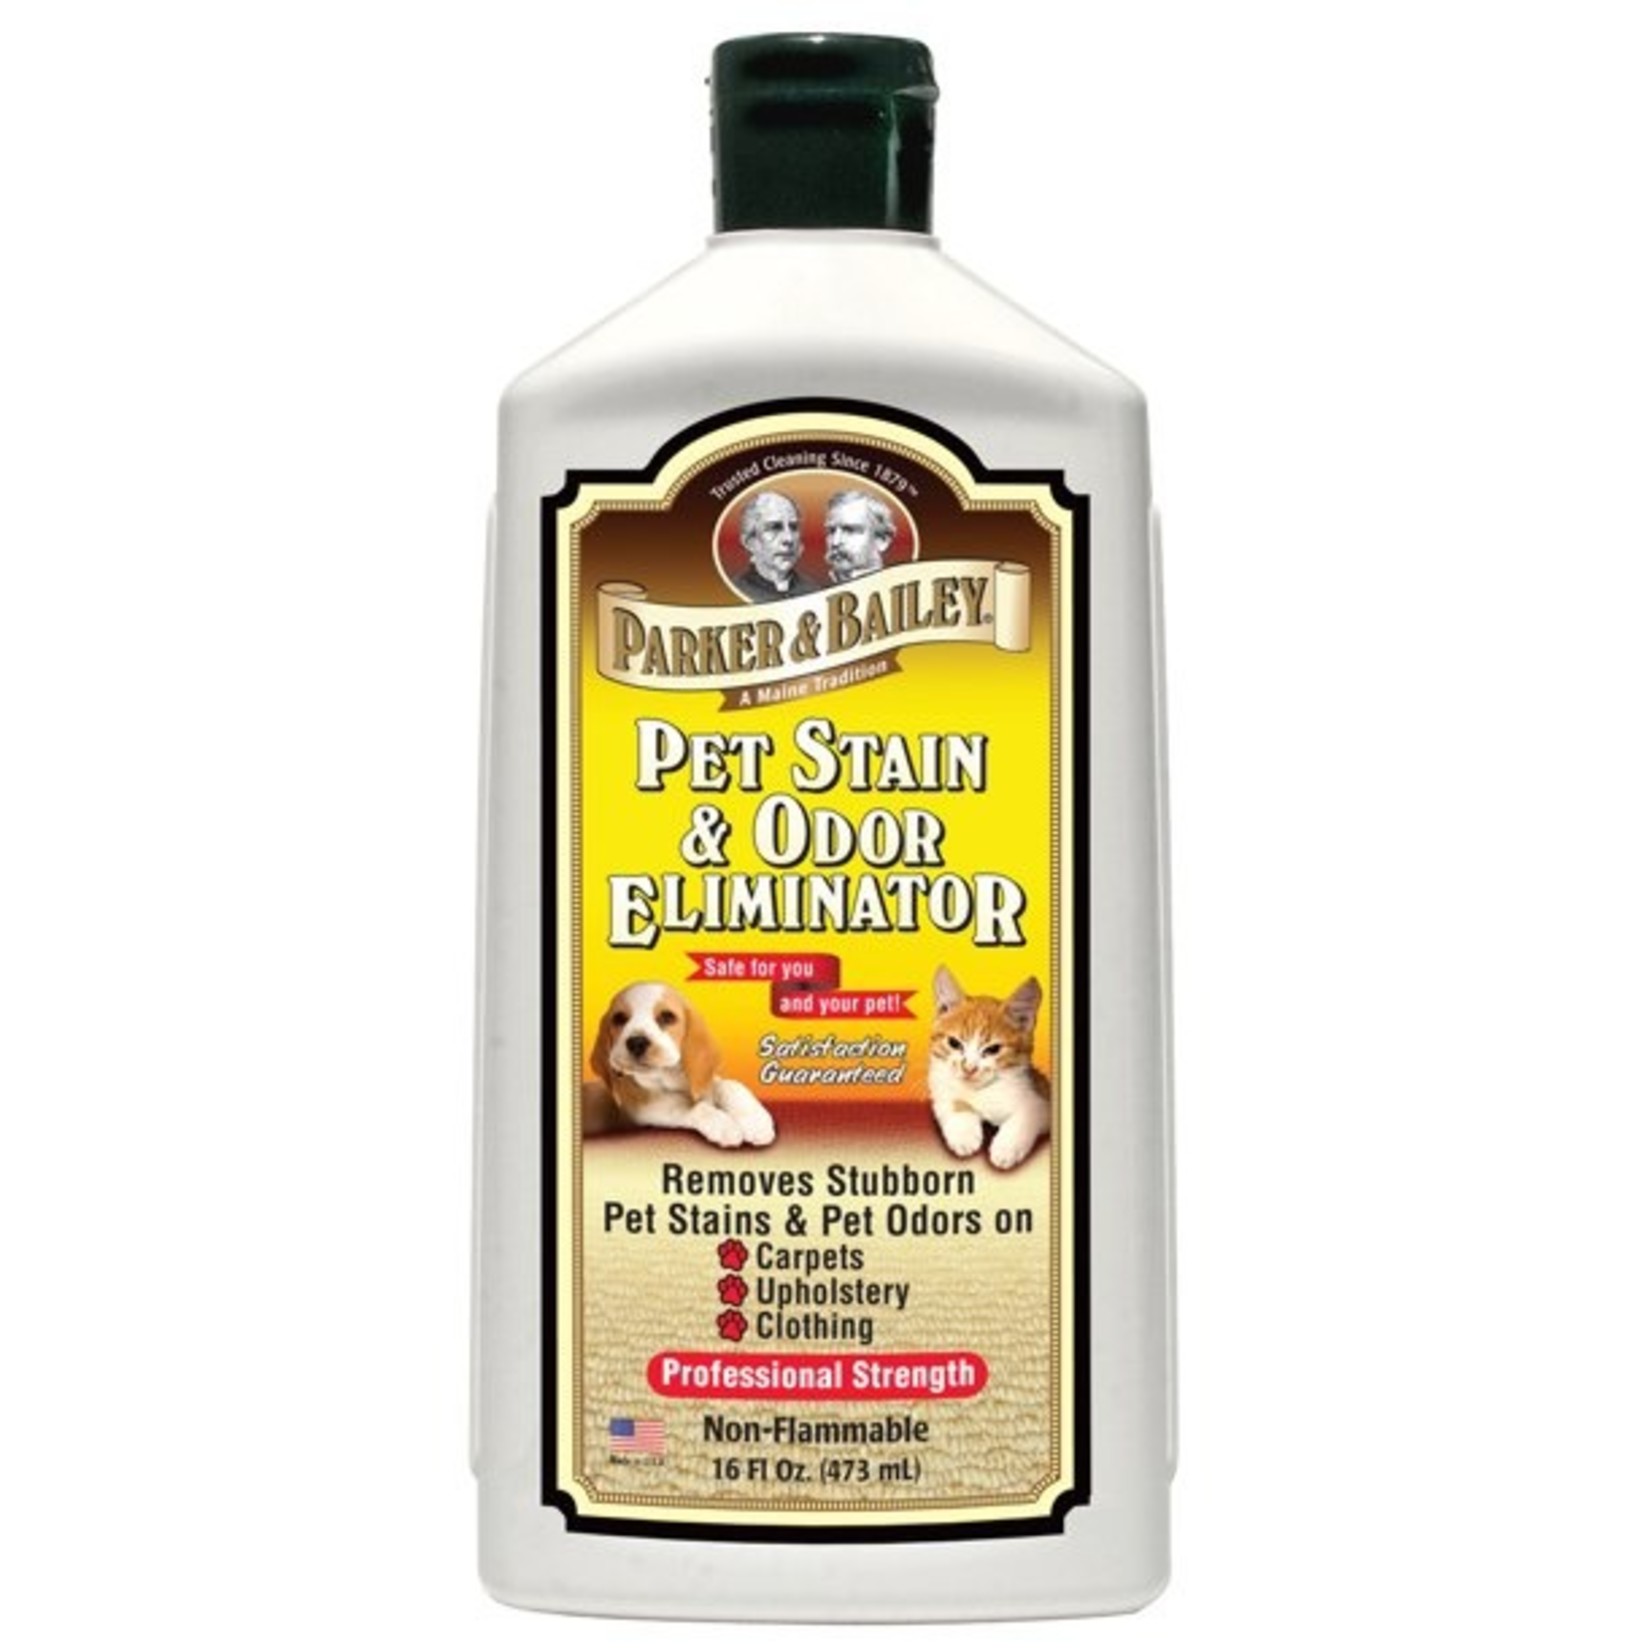 Parker Bailey Pet Stain & Odor Remover 16oz